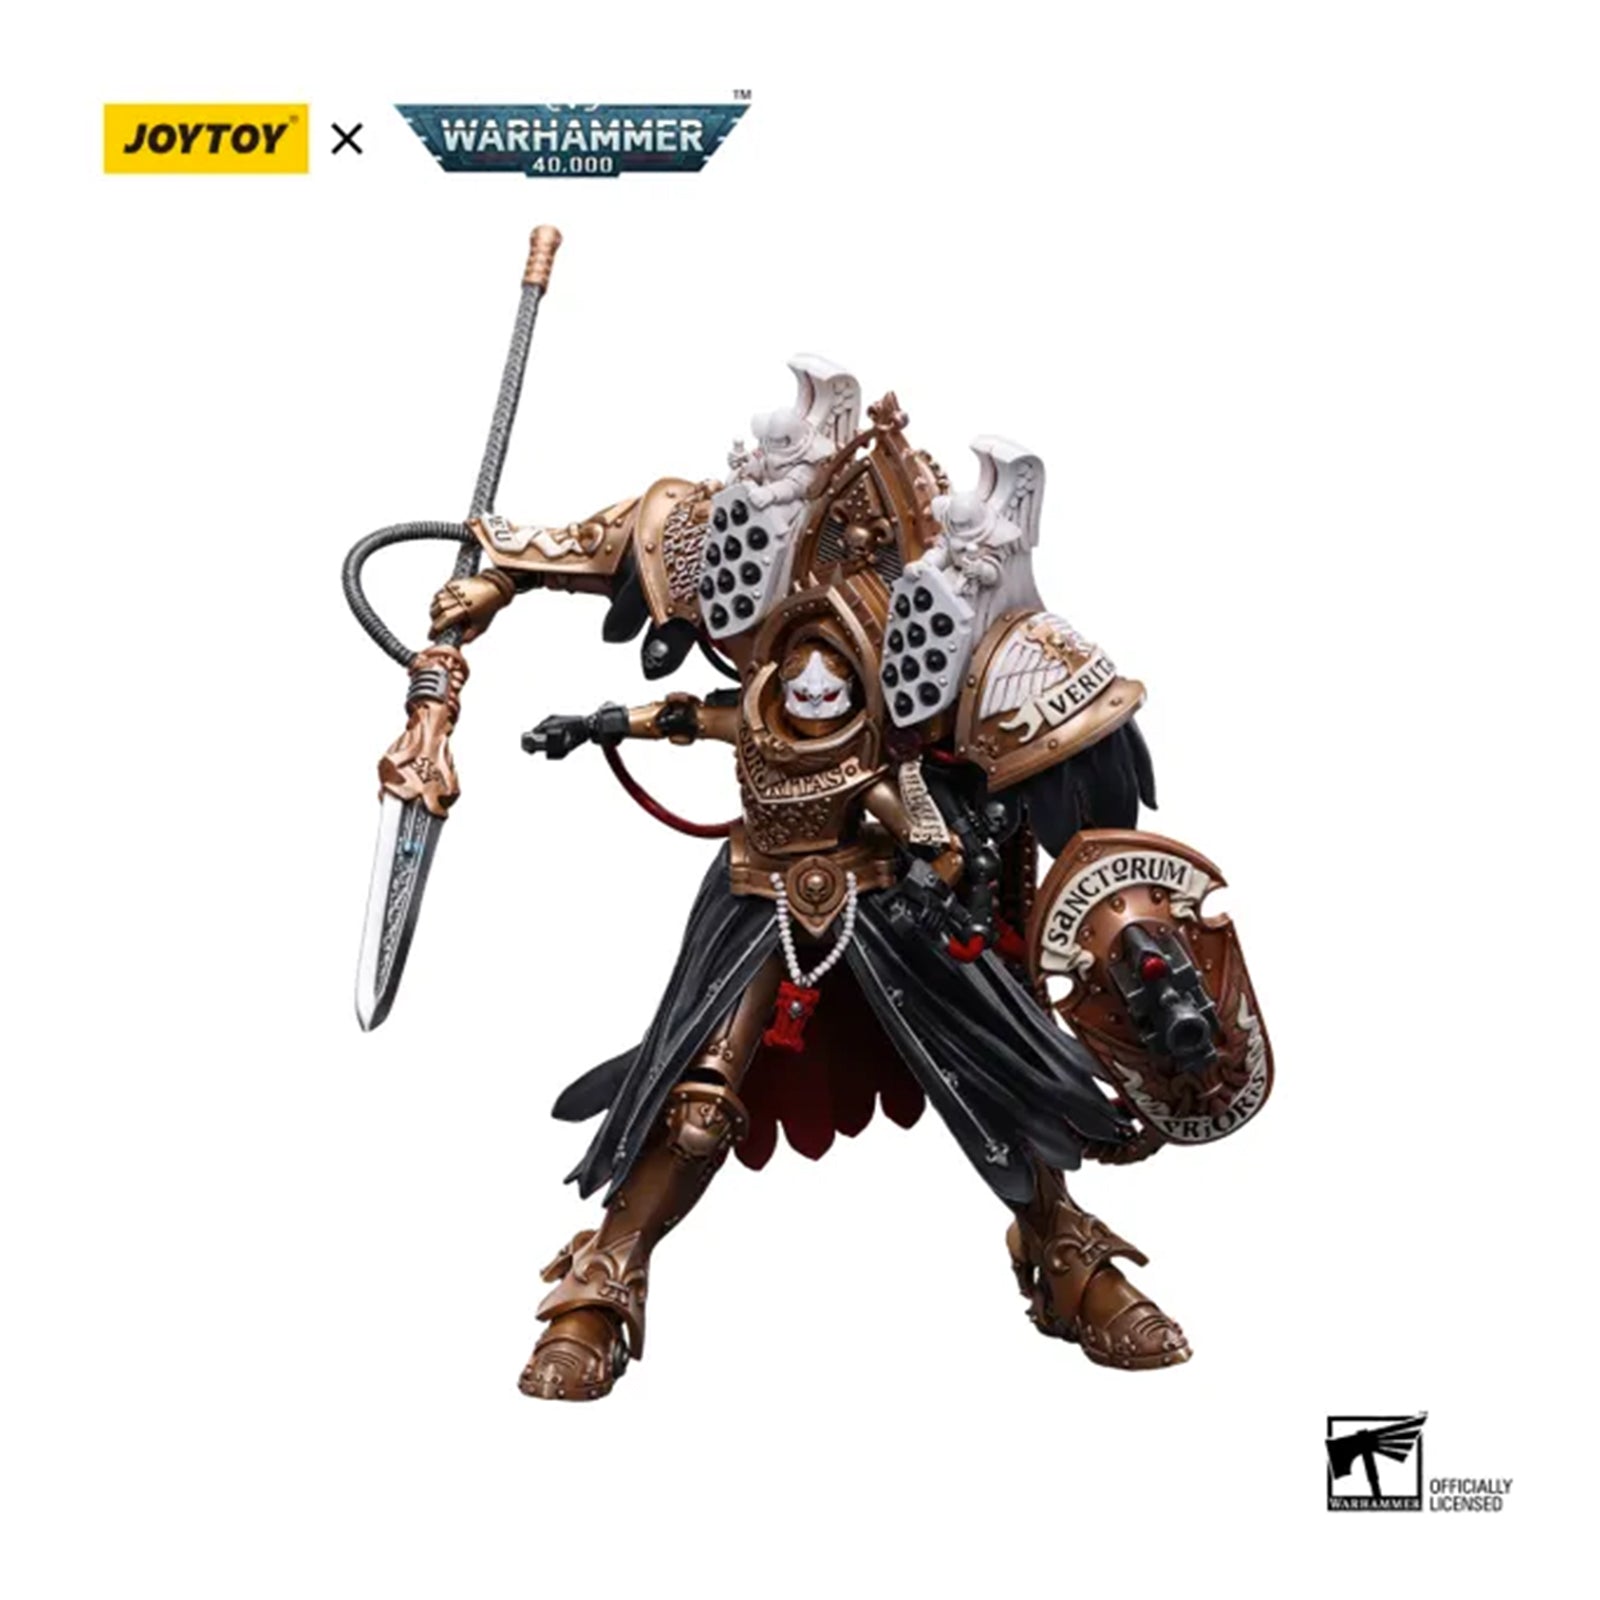 Warhammer 40000 New Arrival – Hobby Factory